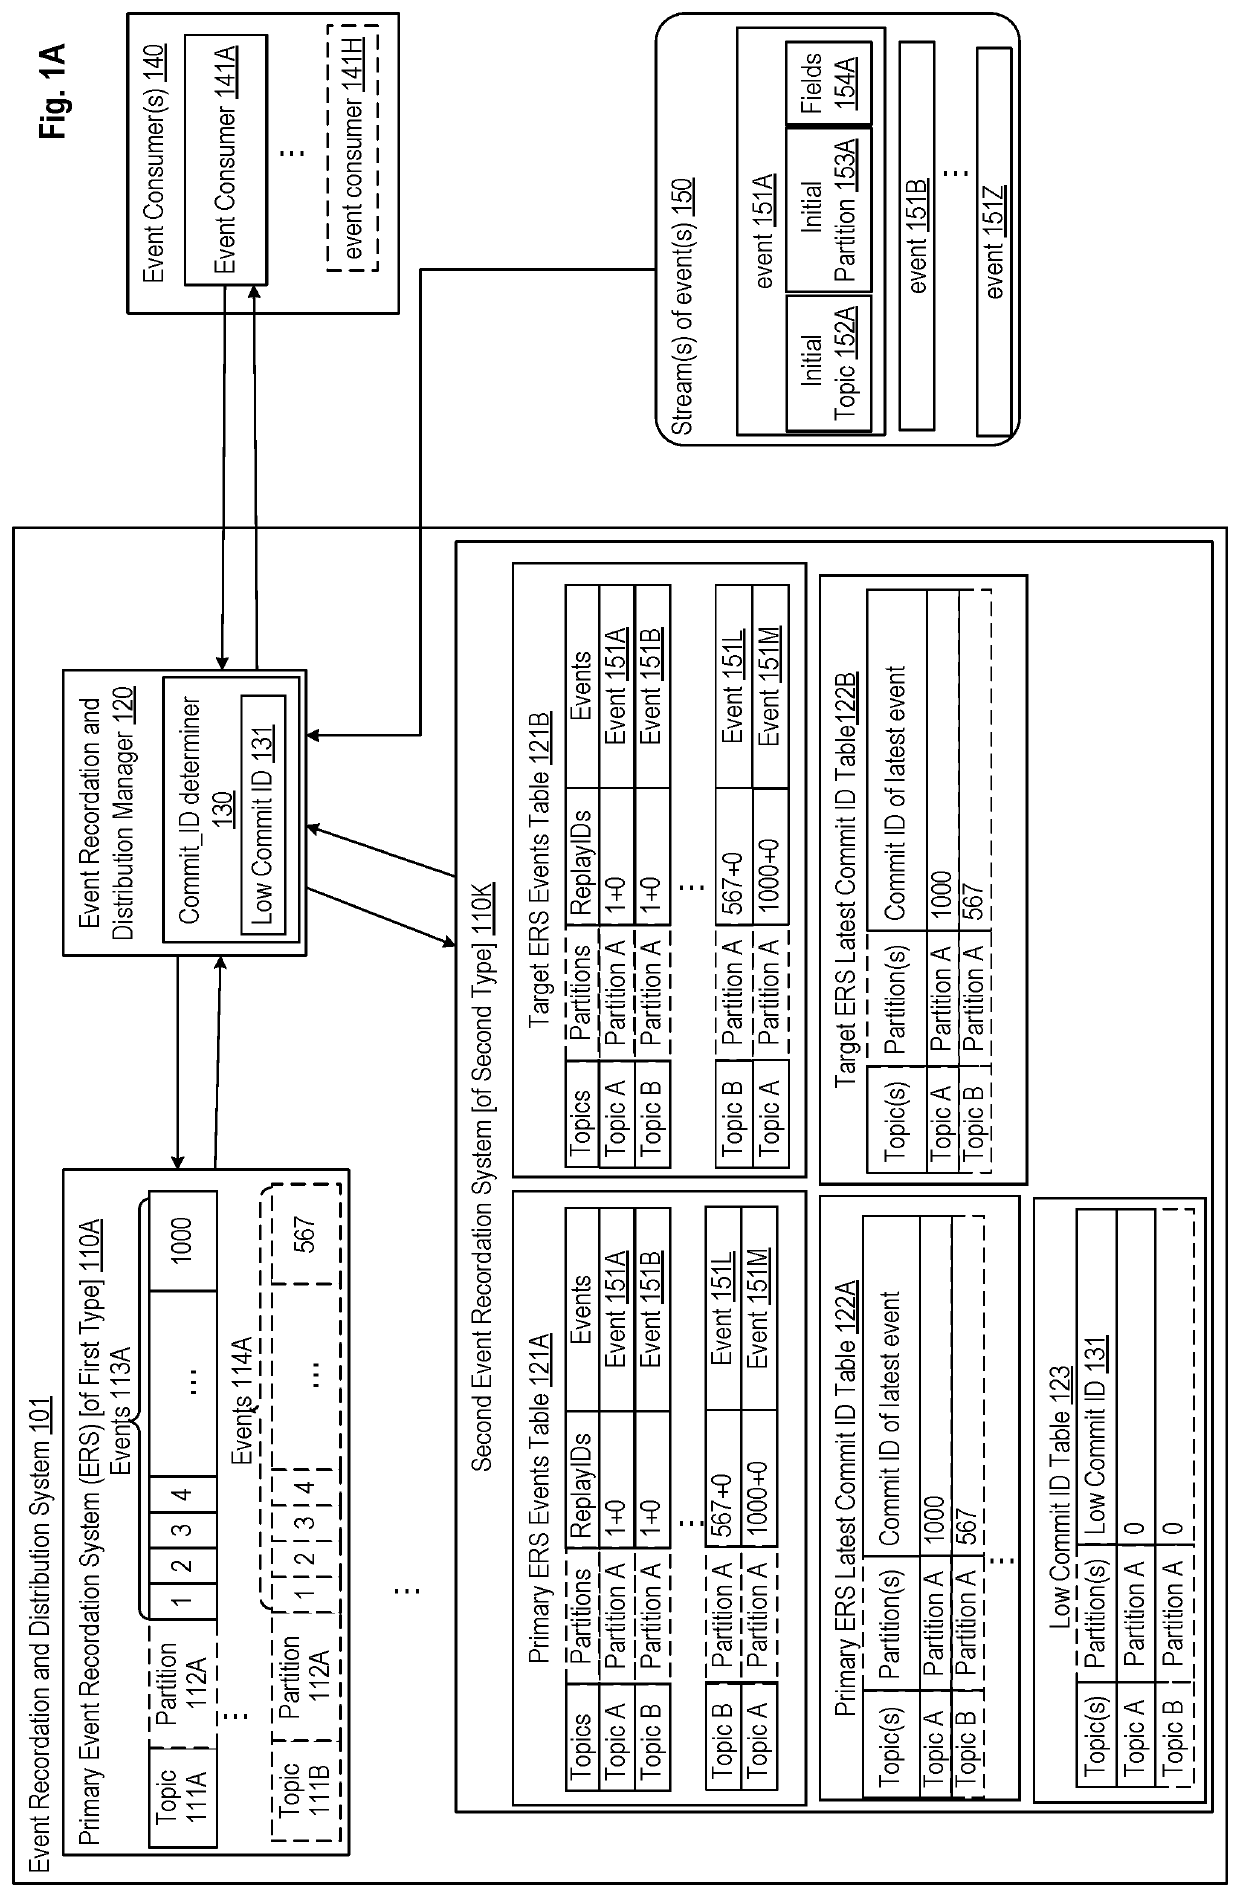 Method and apparatus for a mechanism of disaster recovery and instance refresh in an event recordation system